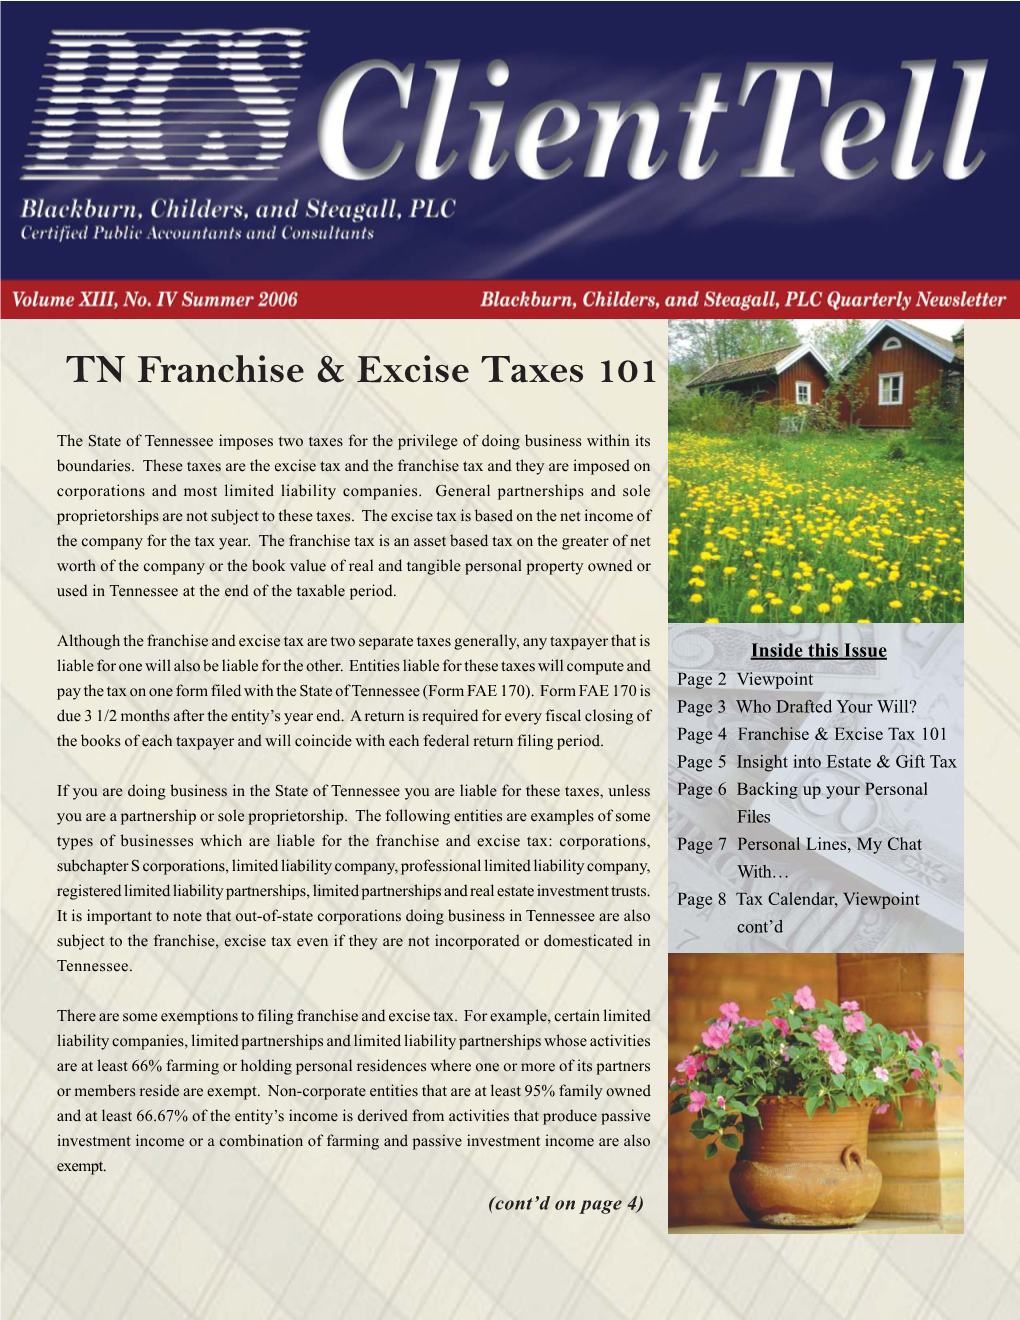 TN Franchise & Excise Taxes